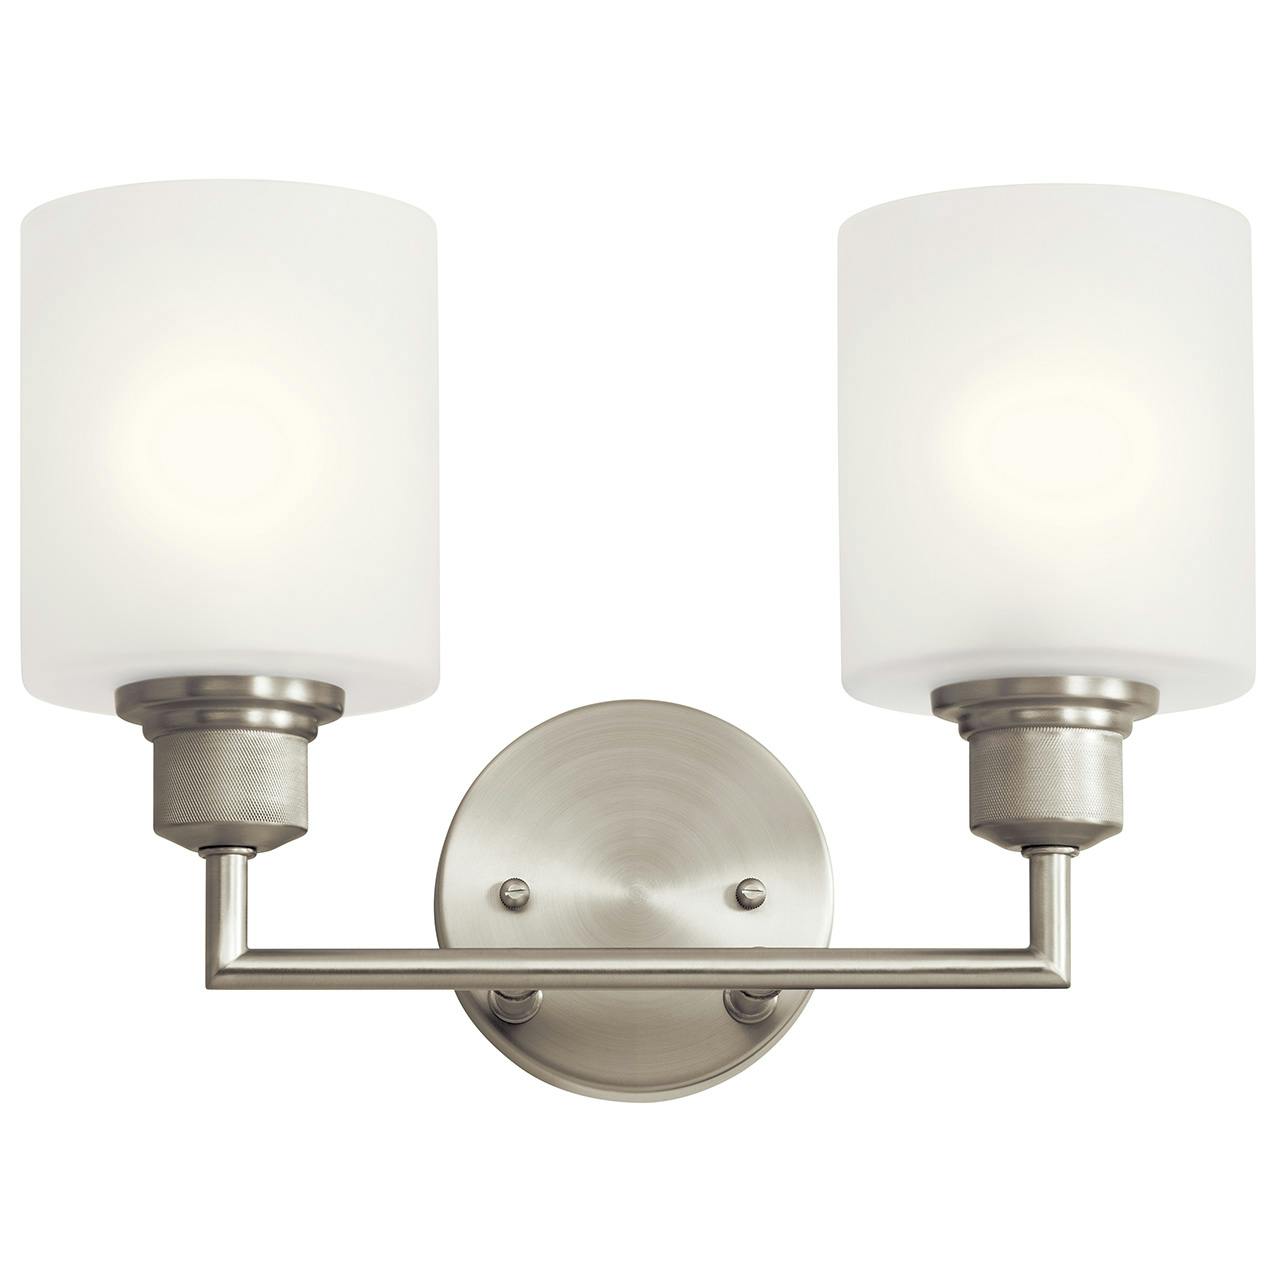 The Lynn Haven 2 Light Vanity Light Nickel facing up on a white background